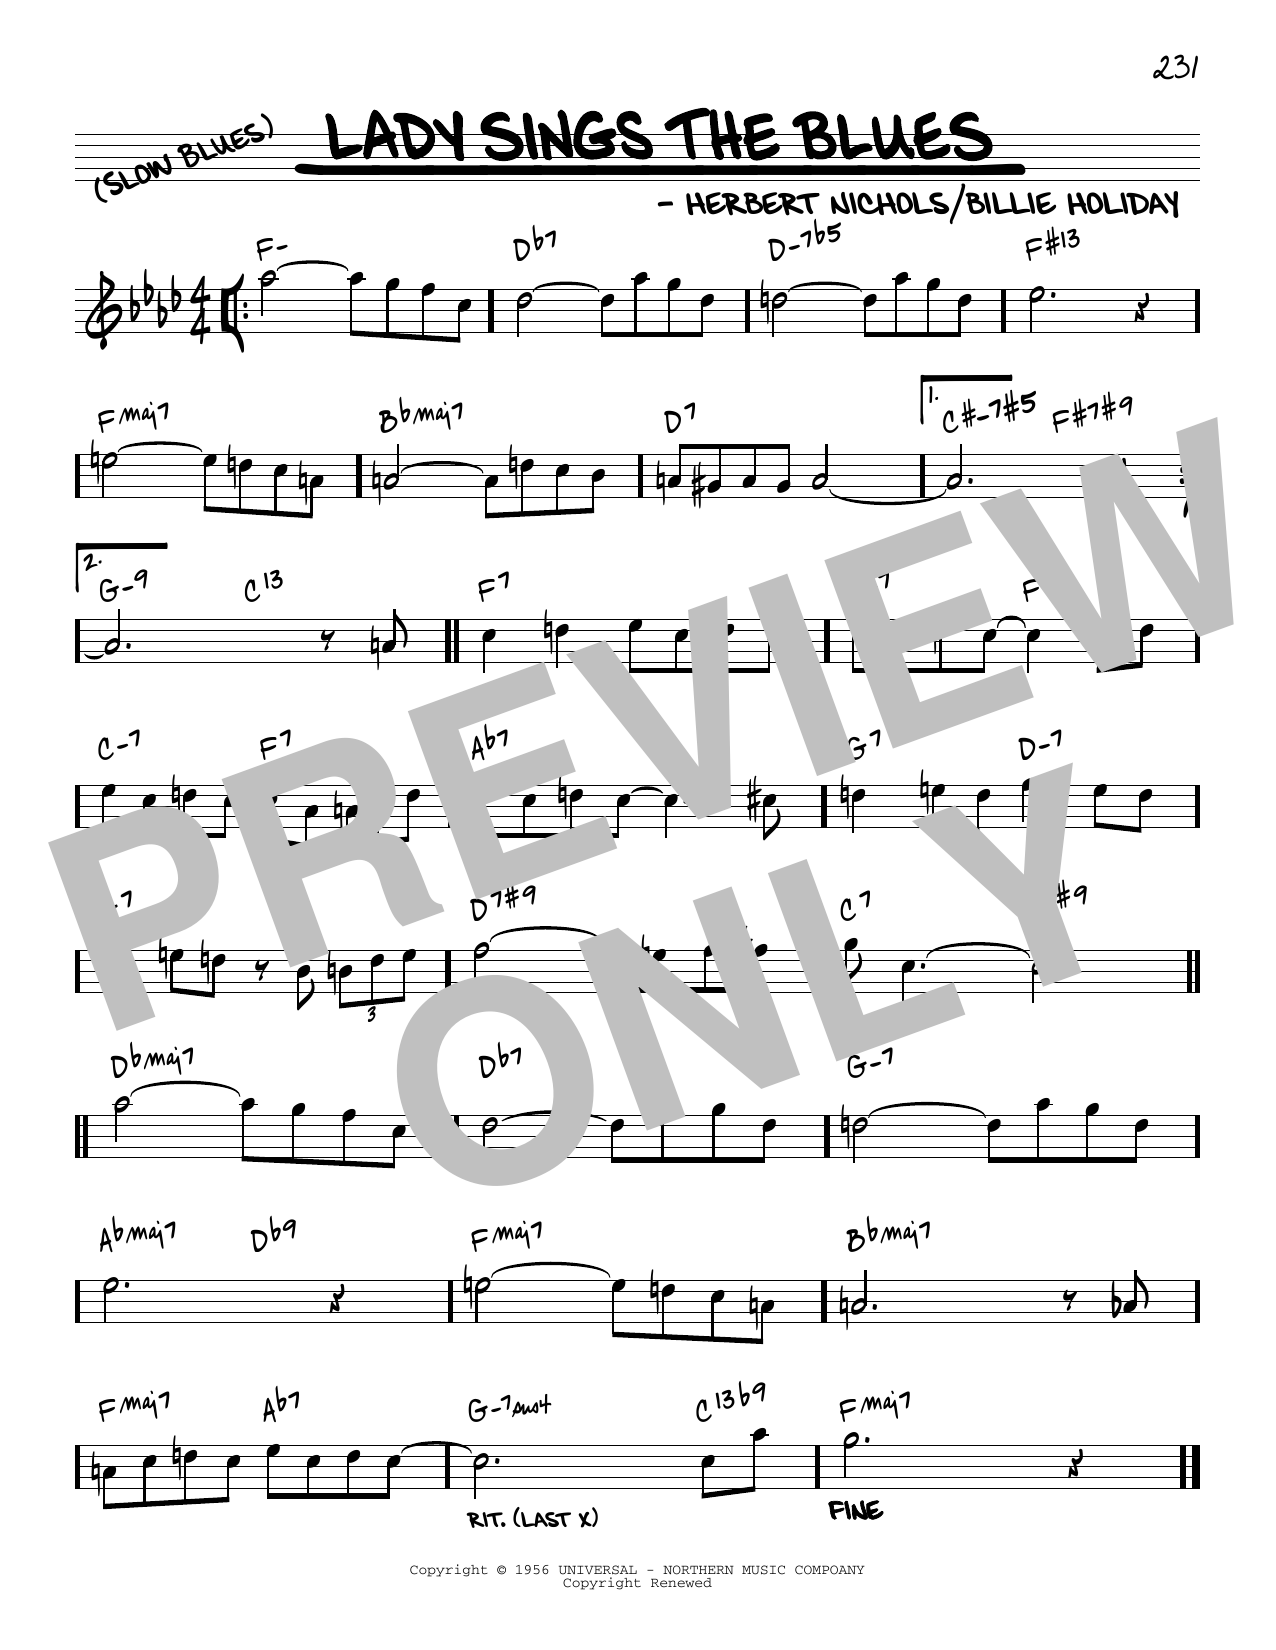 Download Billie Holiday Lady Sings The Blues [Reharmonized vers Sheet Music